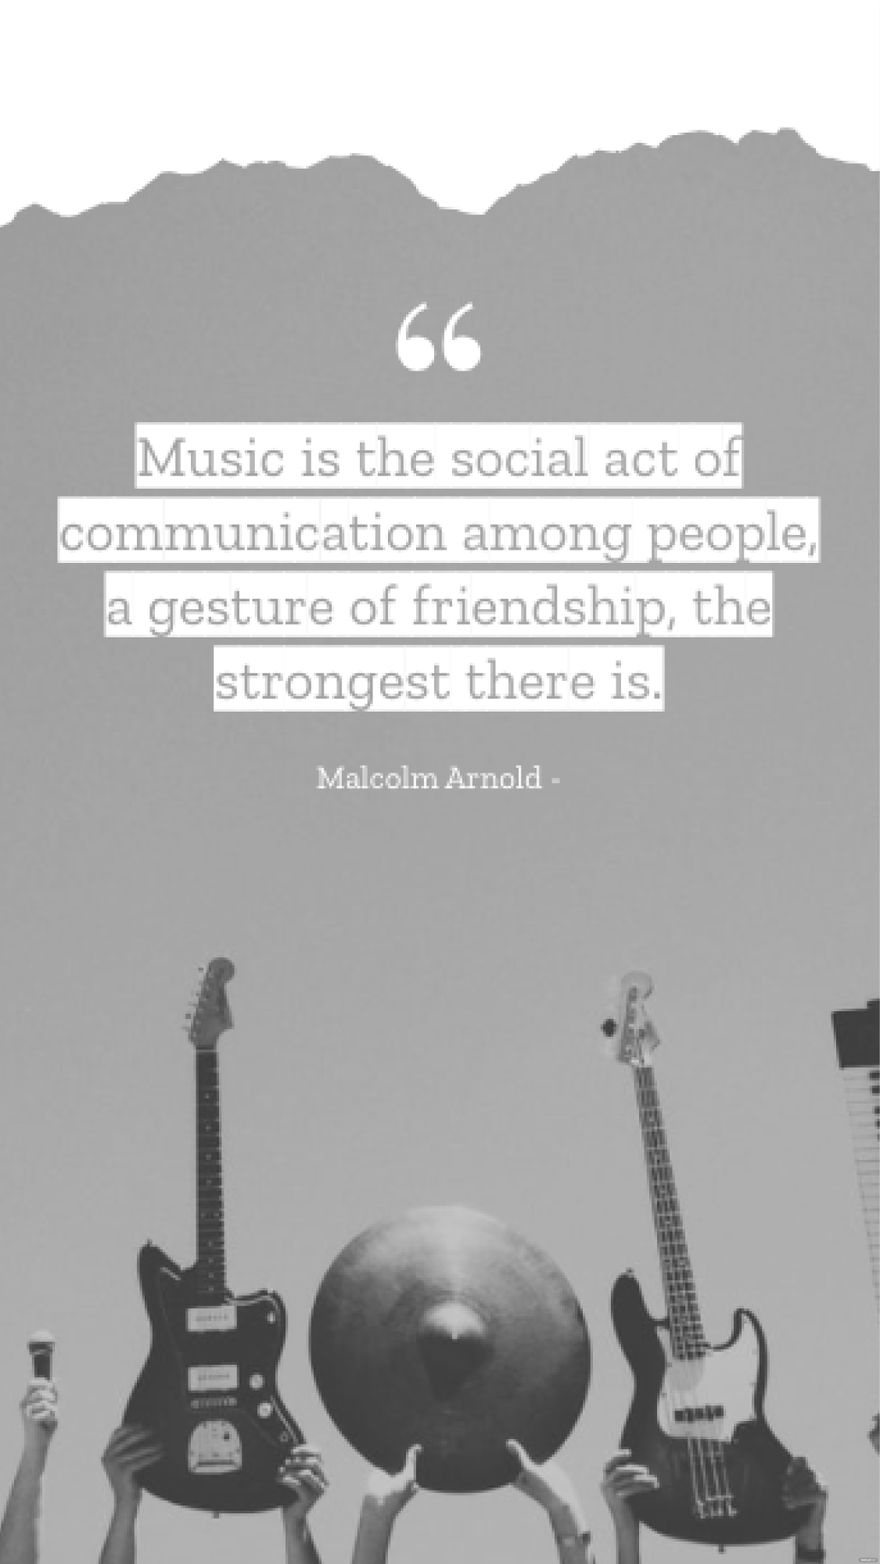 Free Malcolm Arnold - Music is the social act of communication among people, a gesture of friendship, the strongest there is. in JPG